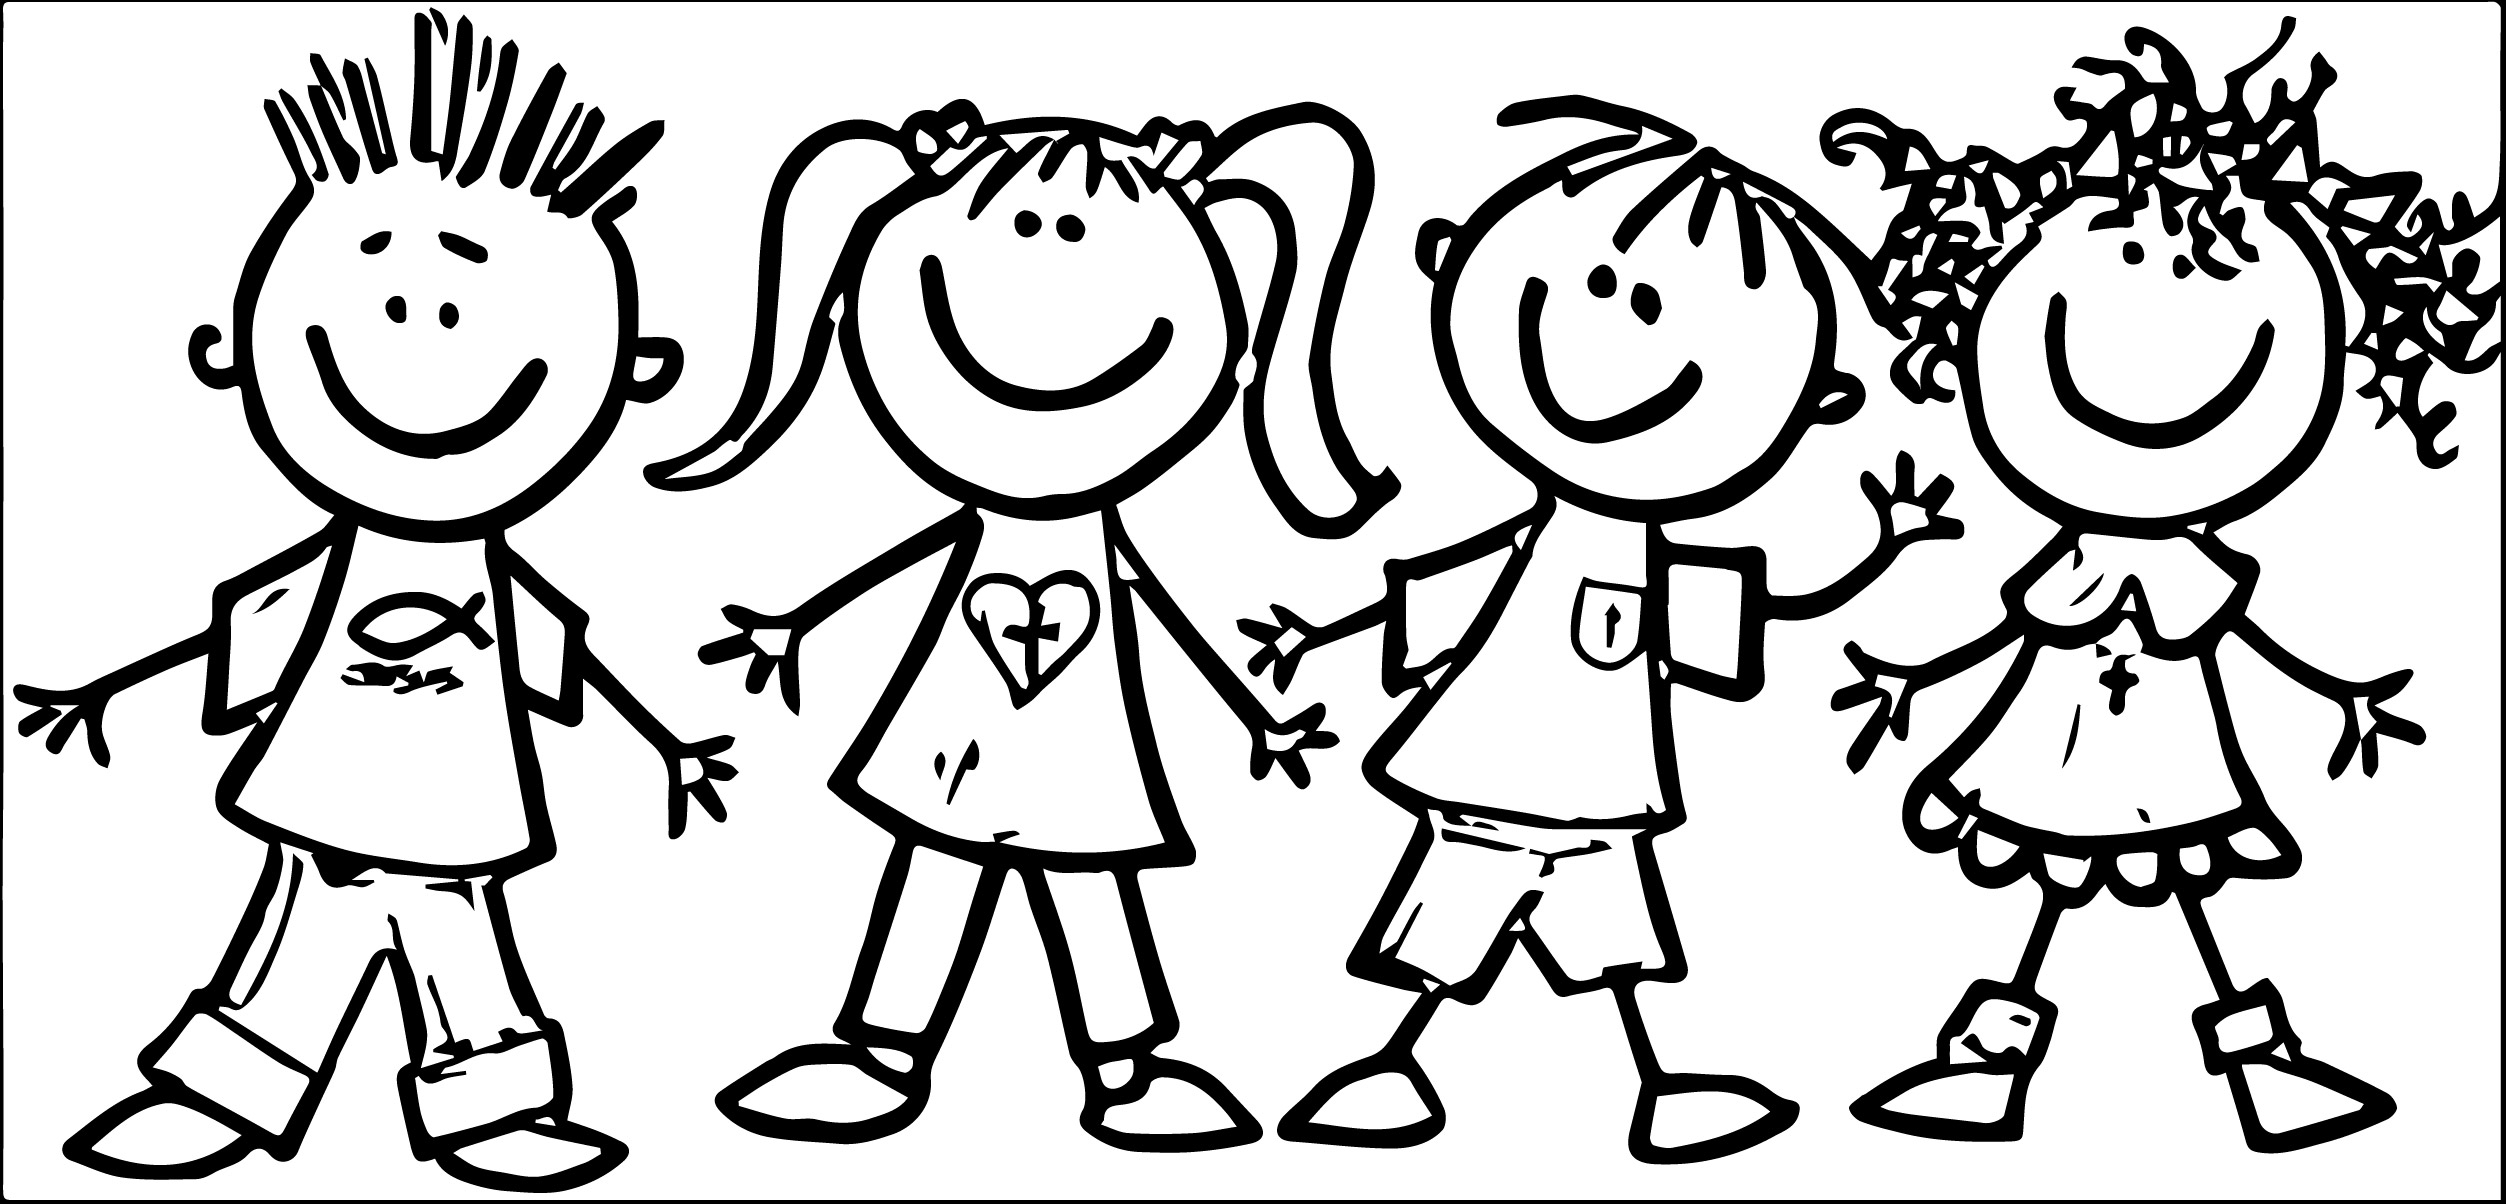 Free School Kids Clipart Black And White, Download Free Clip